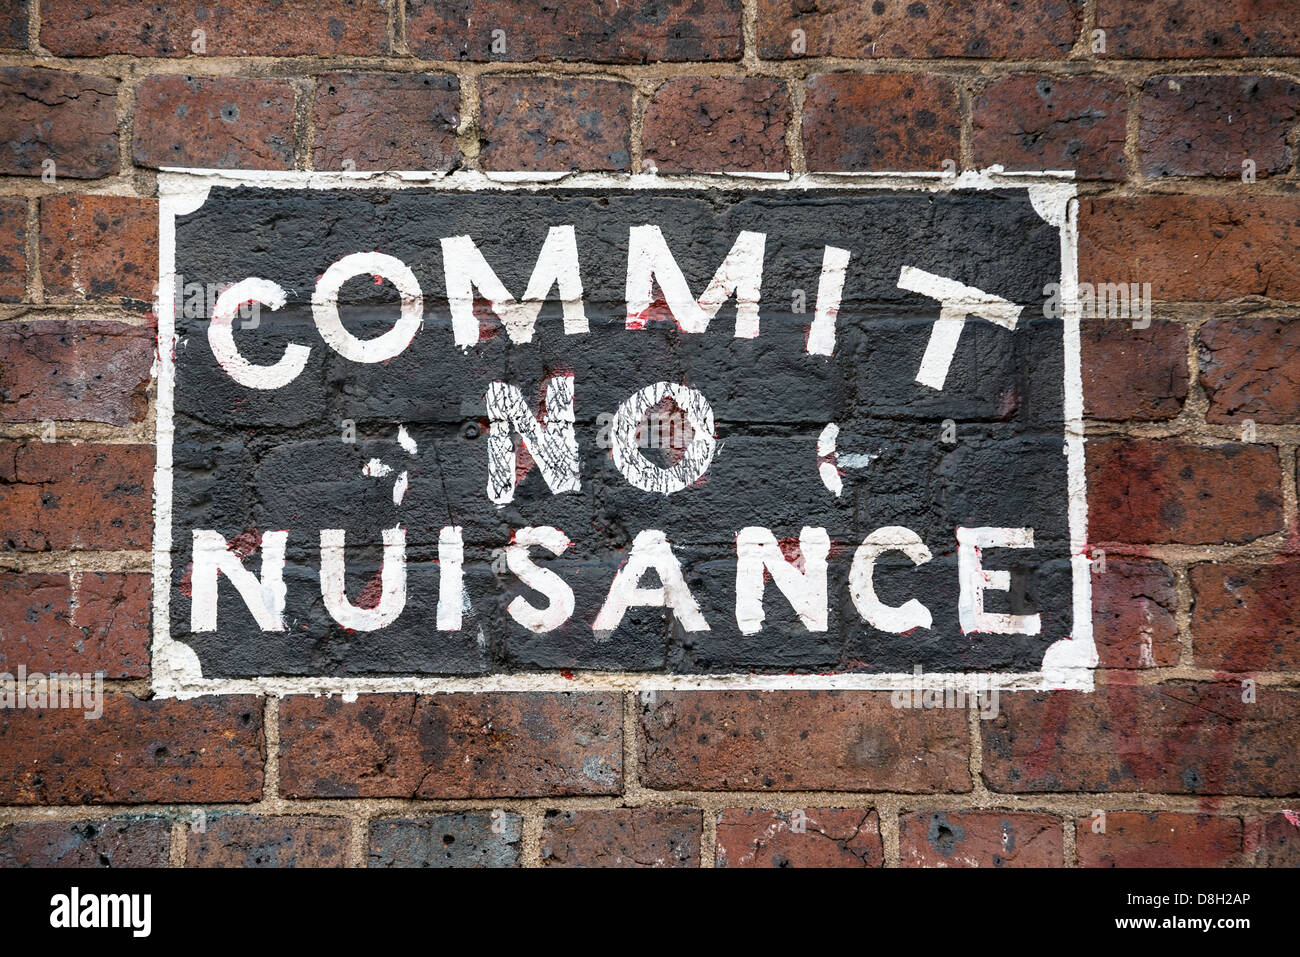 Commit No Nuisance. A sign of an older age on a city wall in Melbourne Australia. Stock Photo